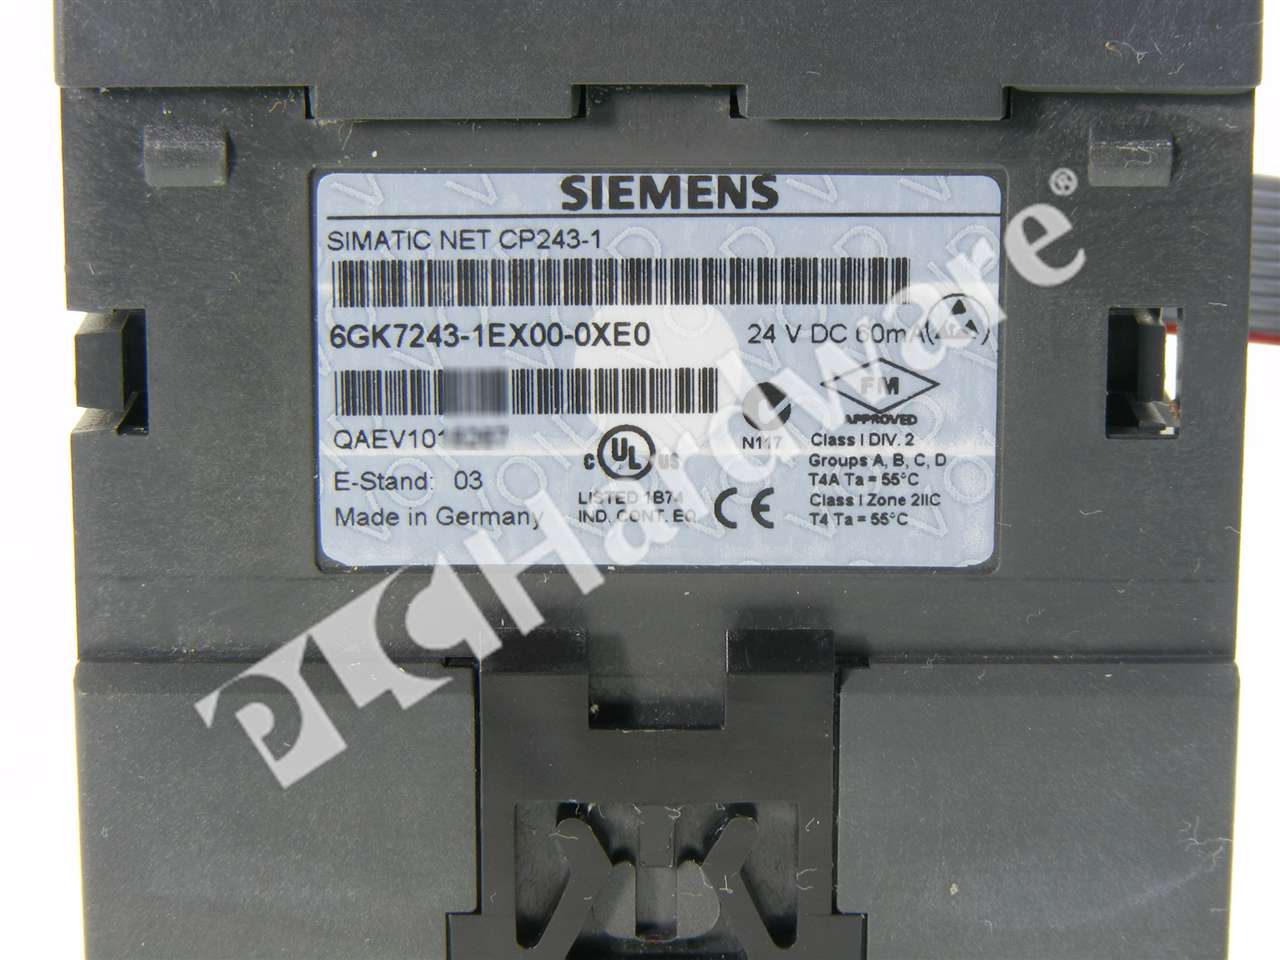 Details about   Siemens Simatic CP 243-1 6GK7 243-1EX00-0XE0  6GK7243-1EX00-0XE0 New in Box 